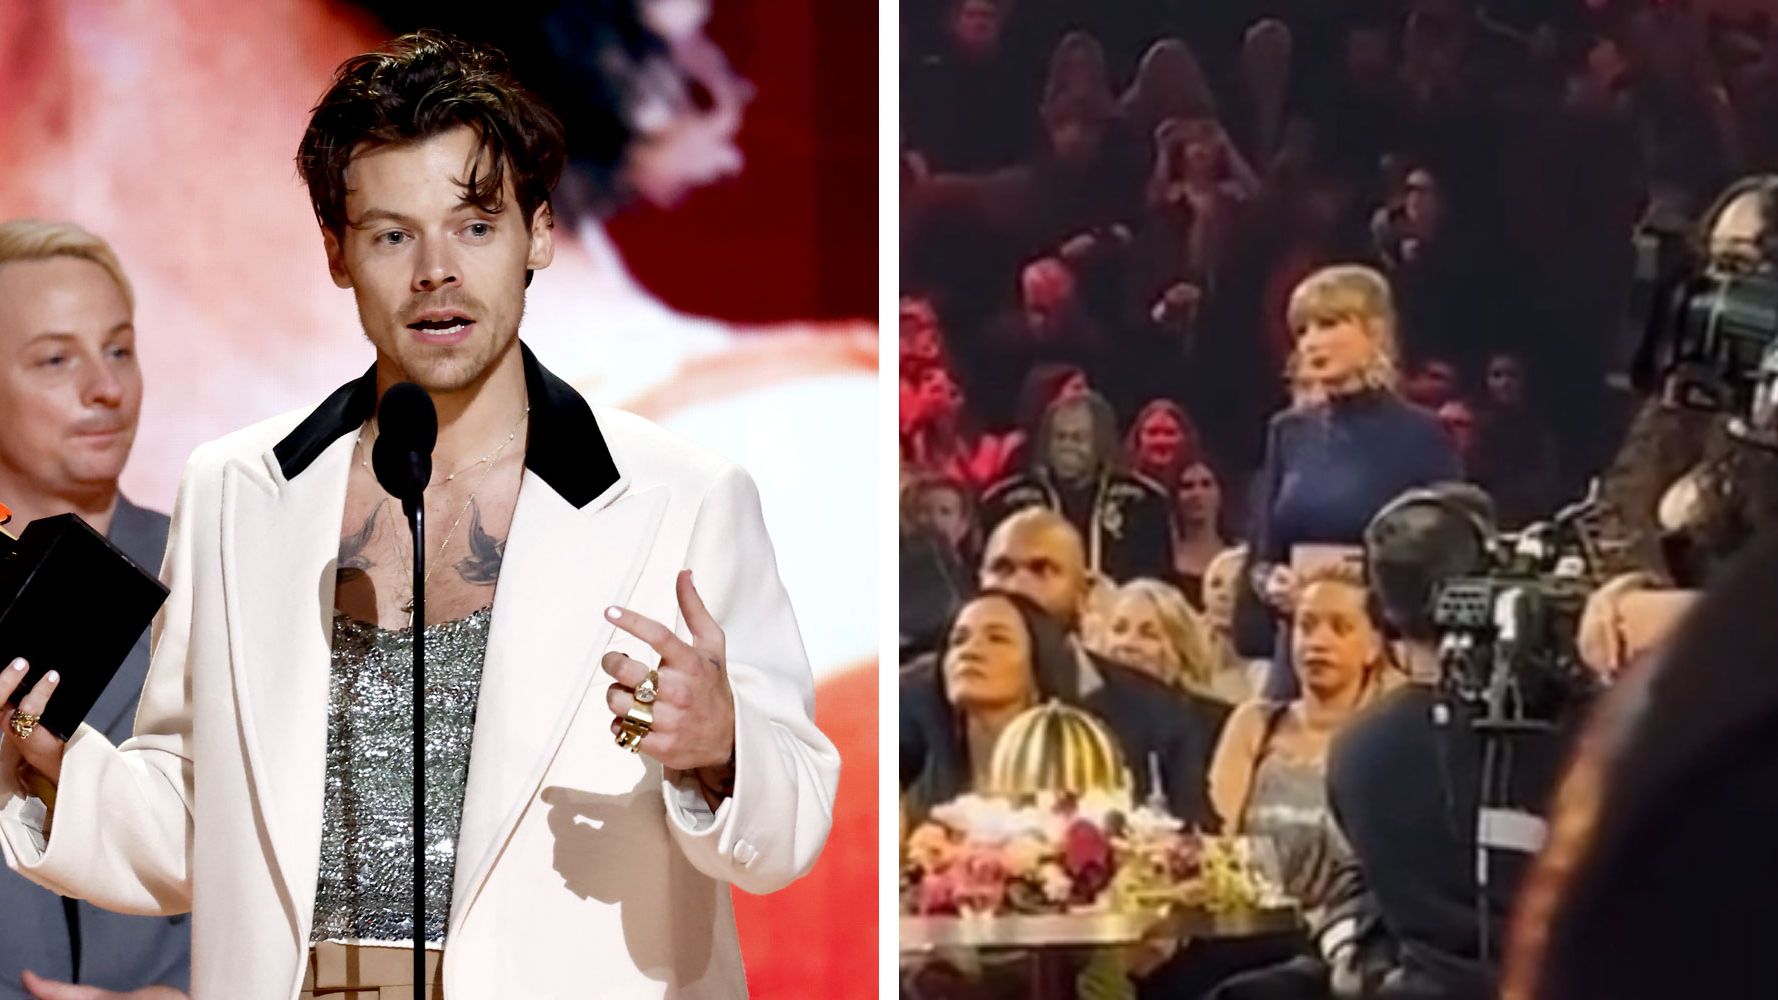 Fans on Twitter React to Harry Styles' Vogue Cover Dress